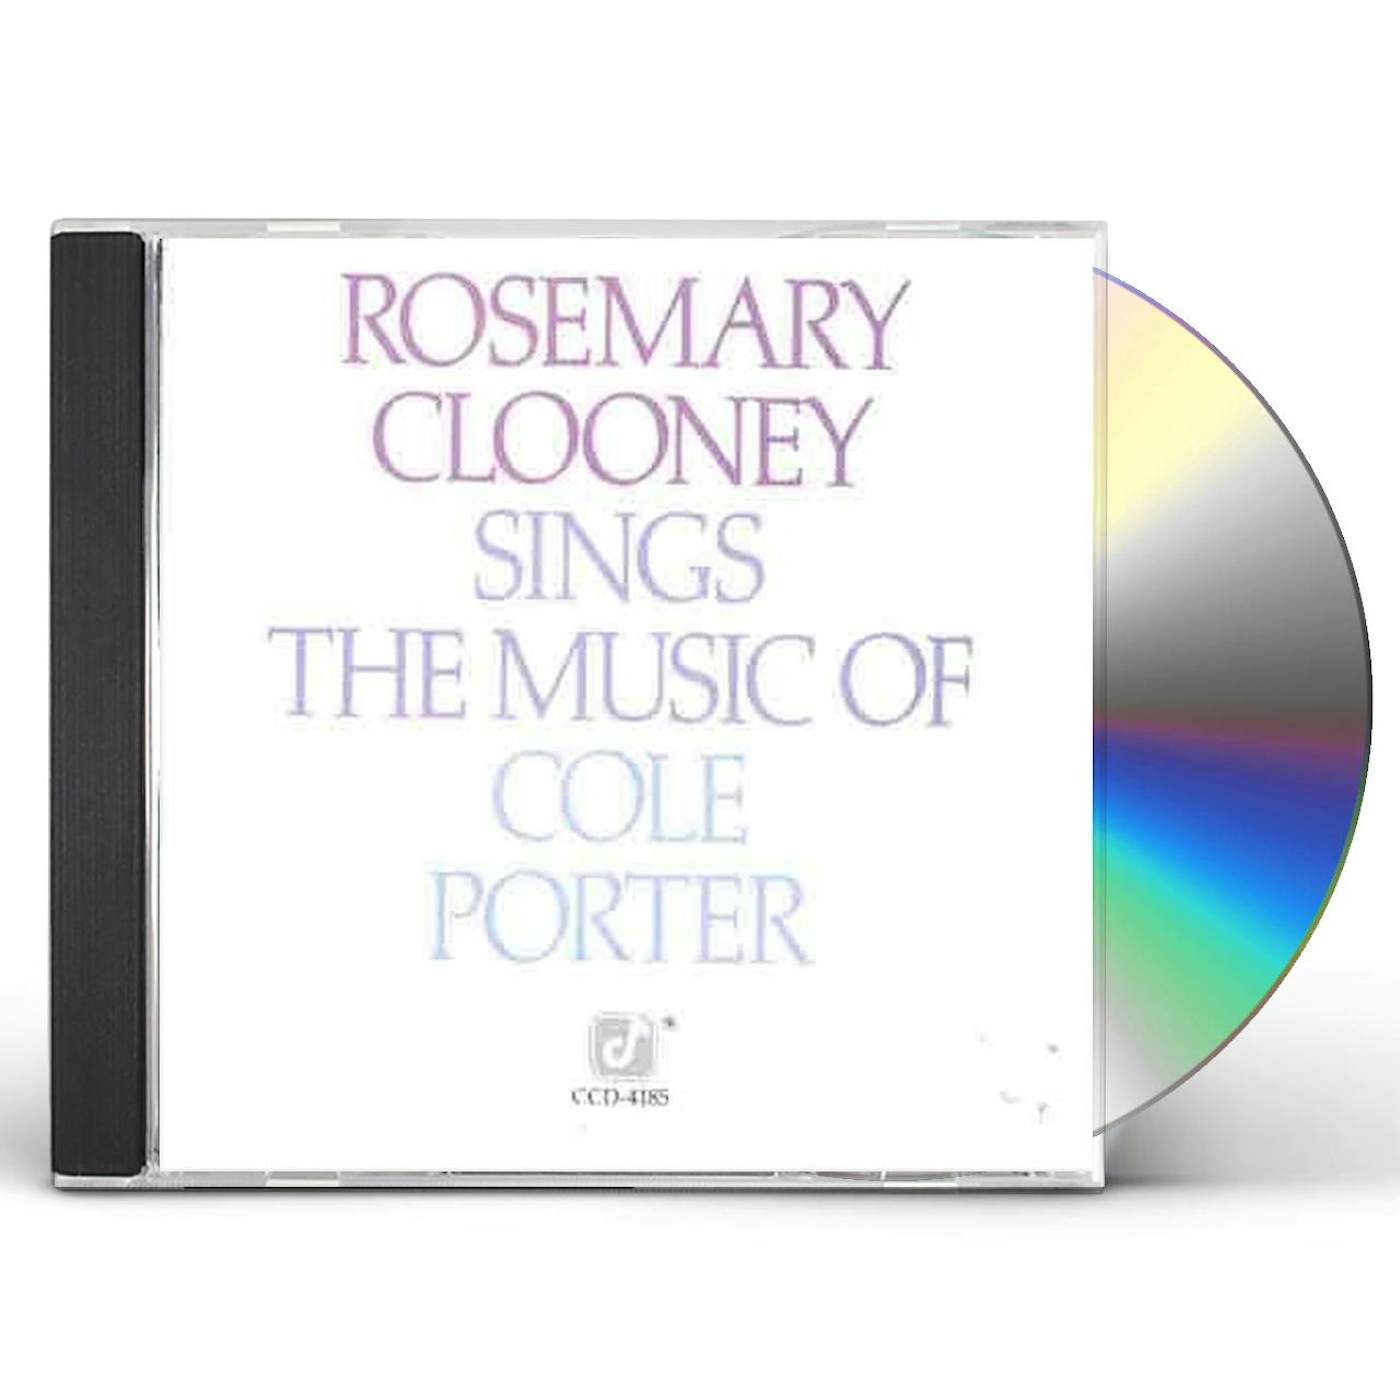 Rosemary Clooney SINGS COLE PORTER CD